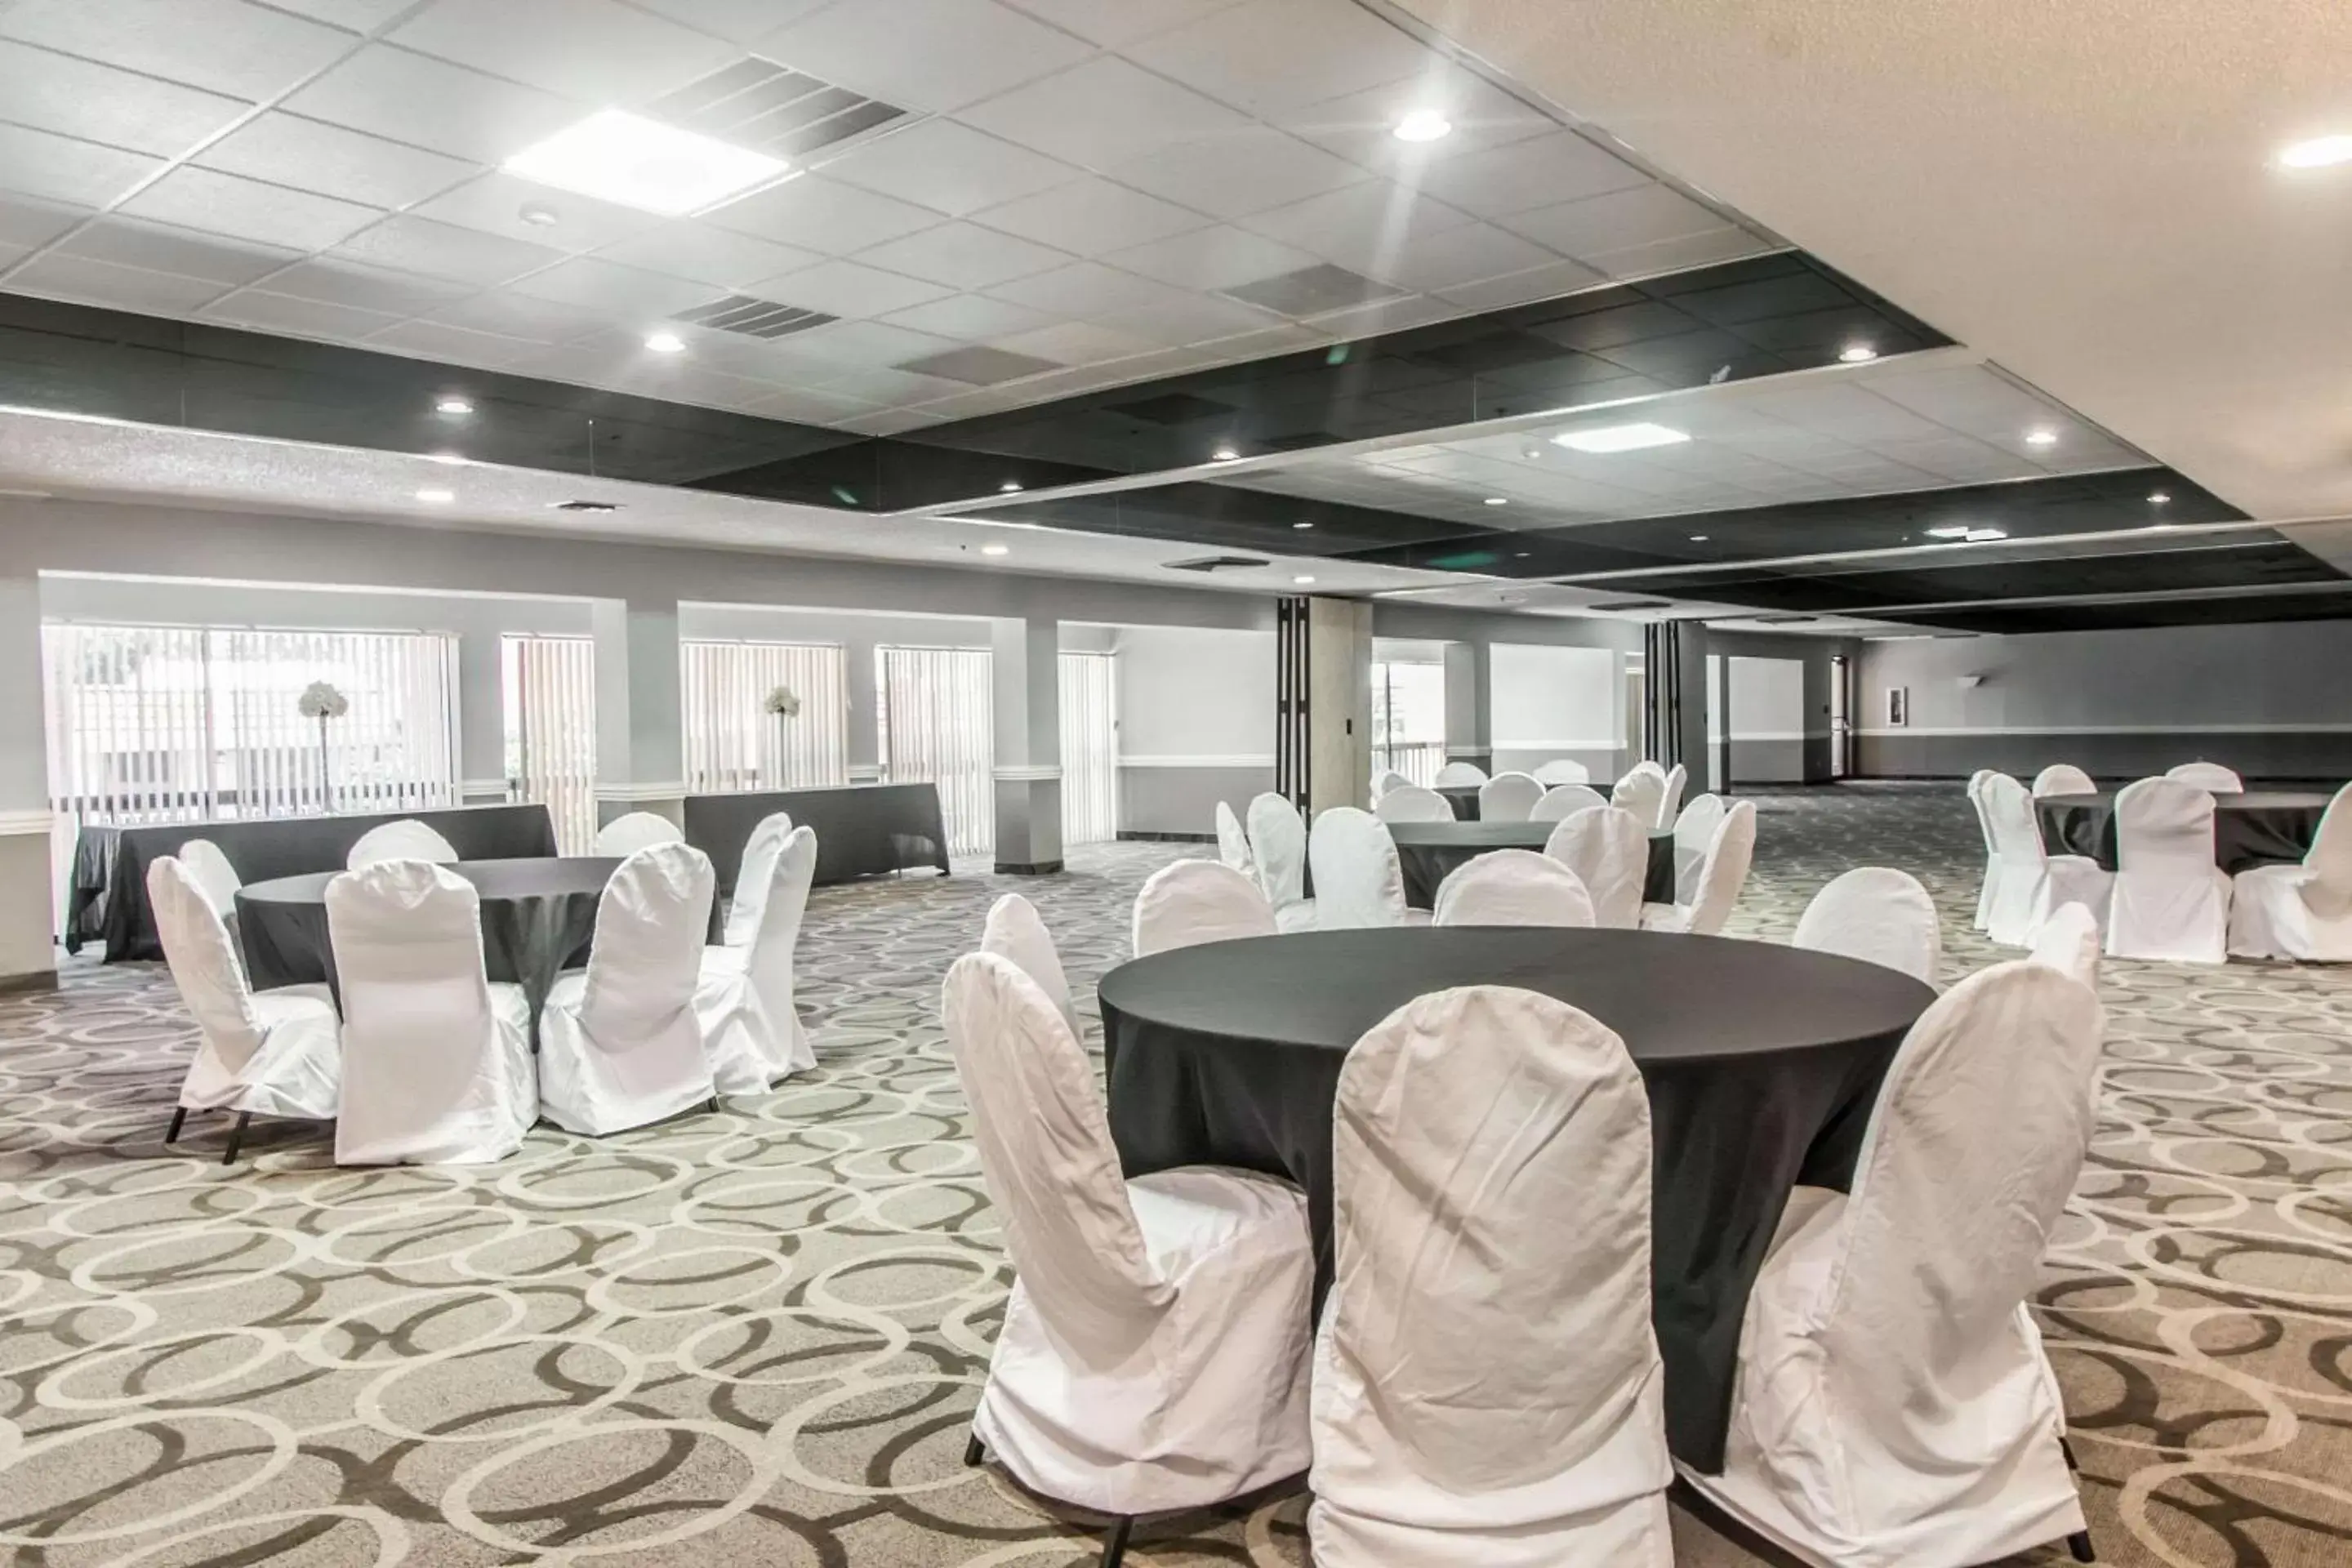 On site, Banquet Facilities in Quality Inn and Suites Conference Center